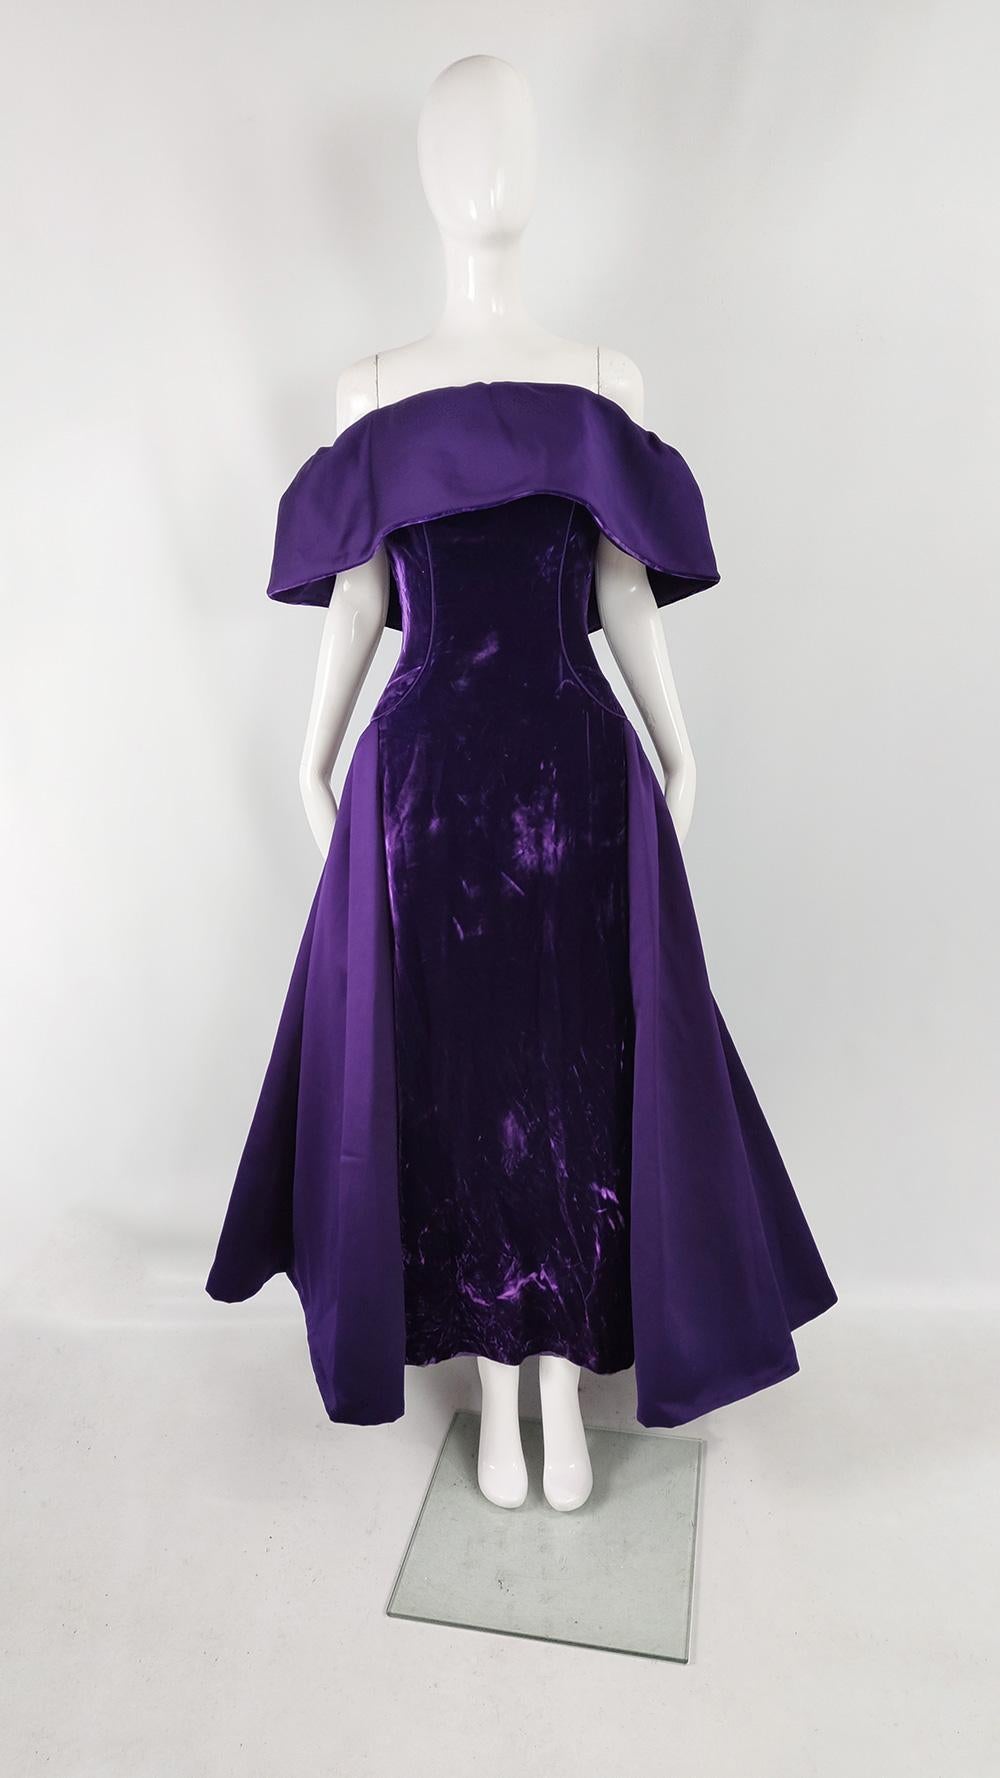 A breathtaking vintage womens evening ball gown from the 80s by luxury American fashion designer, Victor Costa. In a purple crushed velvet which has incredible lustre, with a dramatic off the shoulder shawl collar. It has an incredible full length